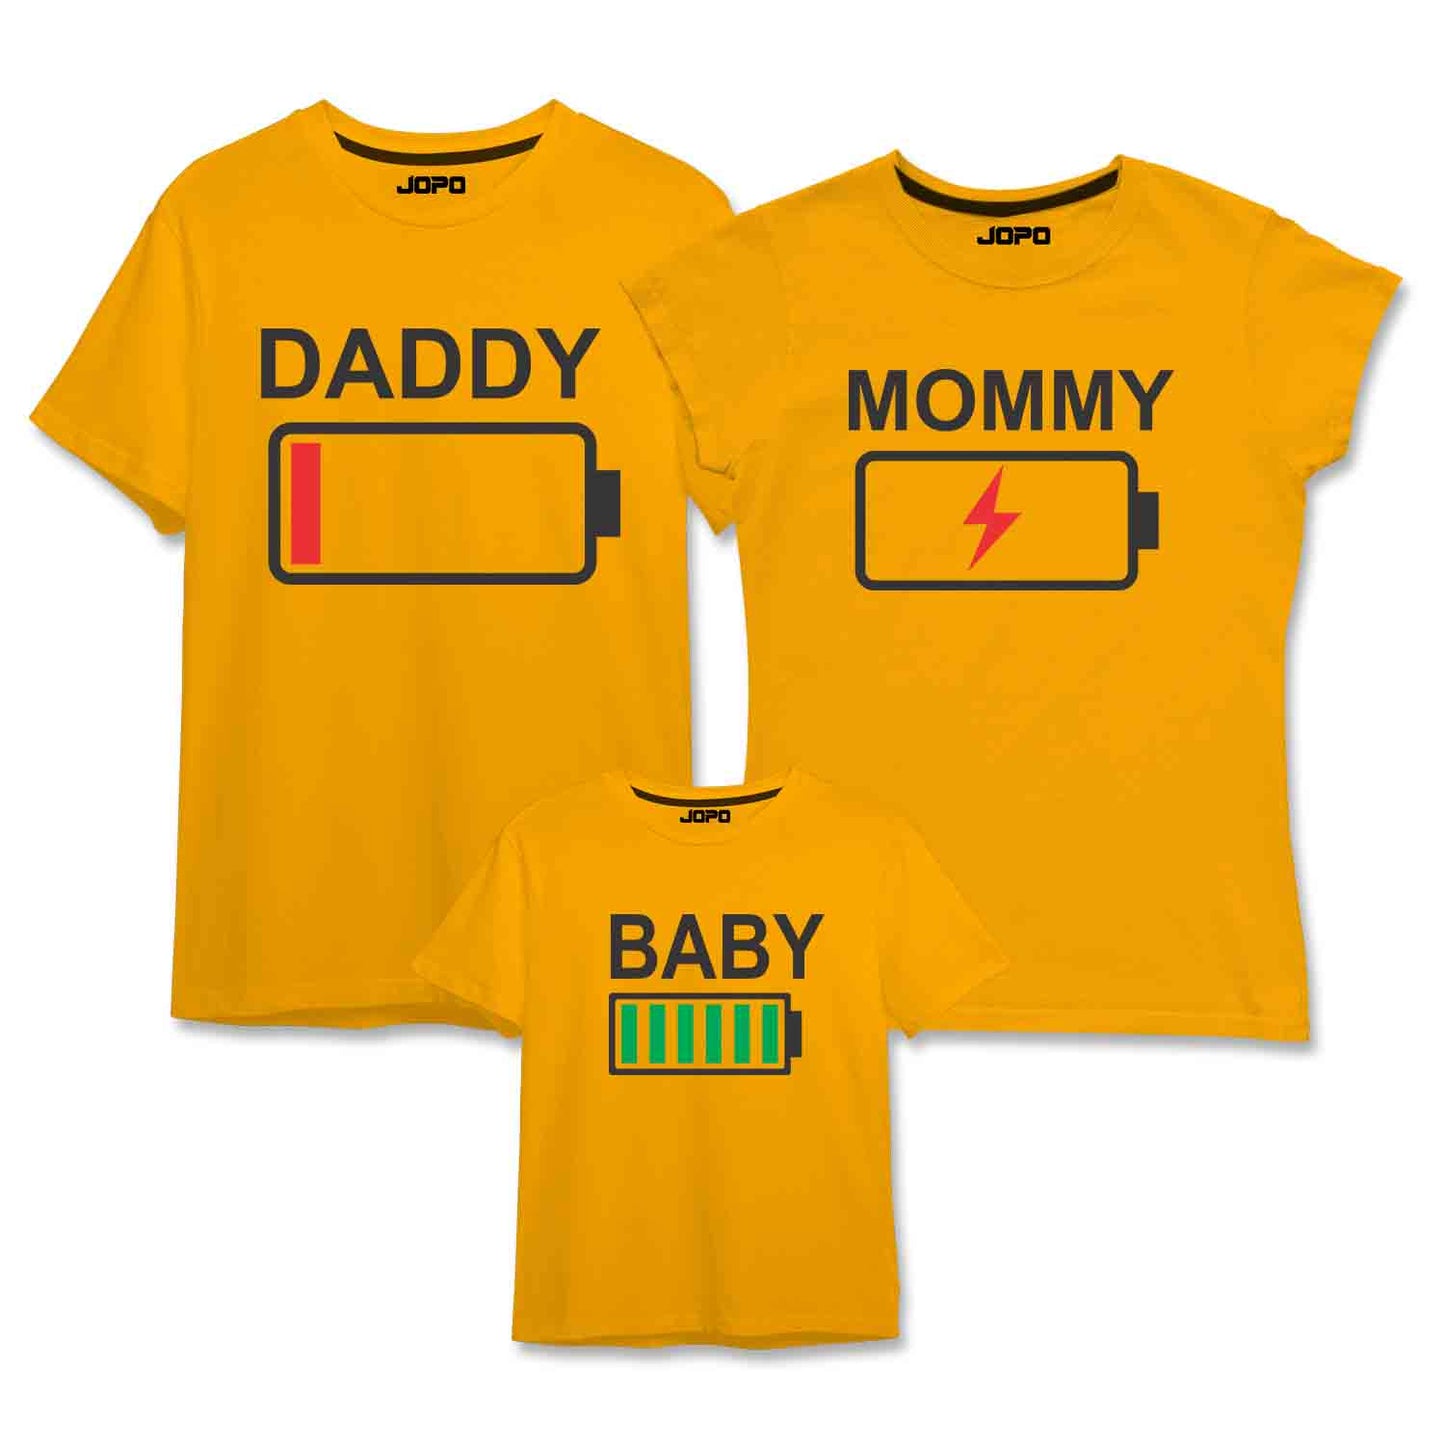 Full Charged Battery Matching Family T-Shirts Set of 3 Mom, Dad, Daughter